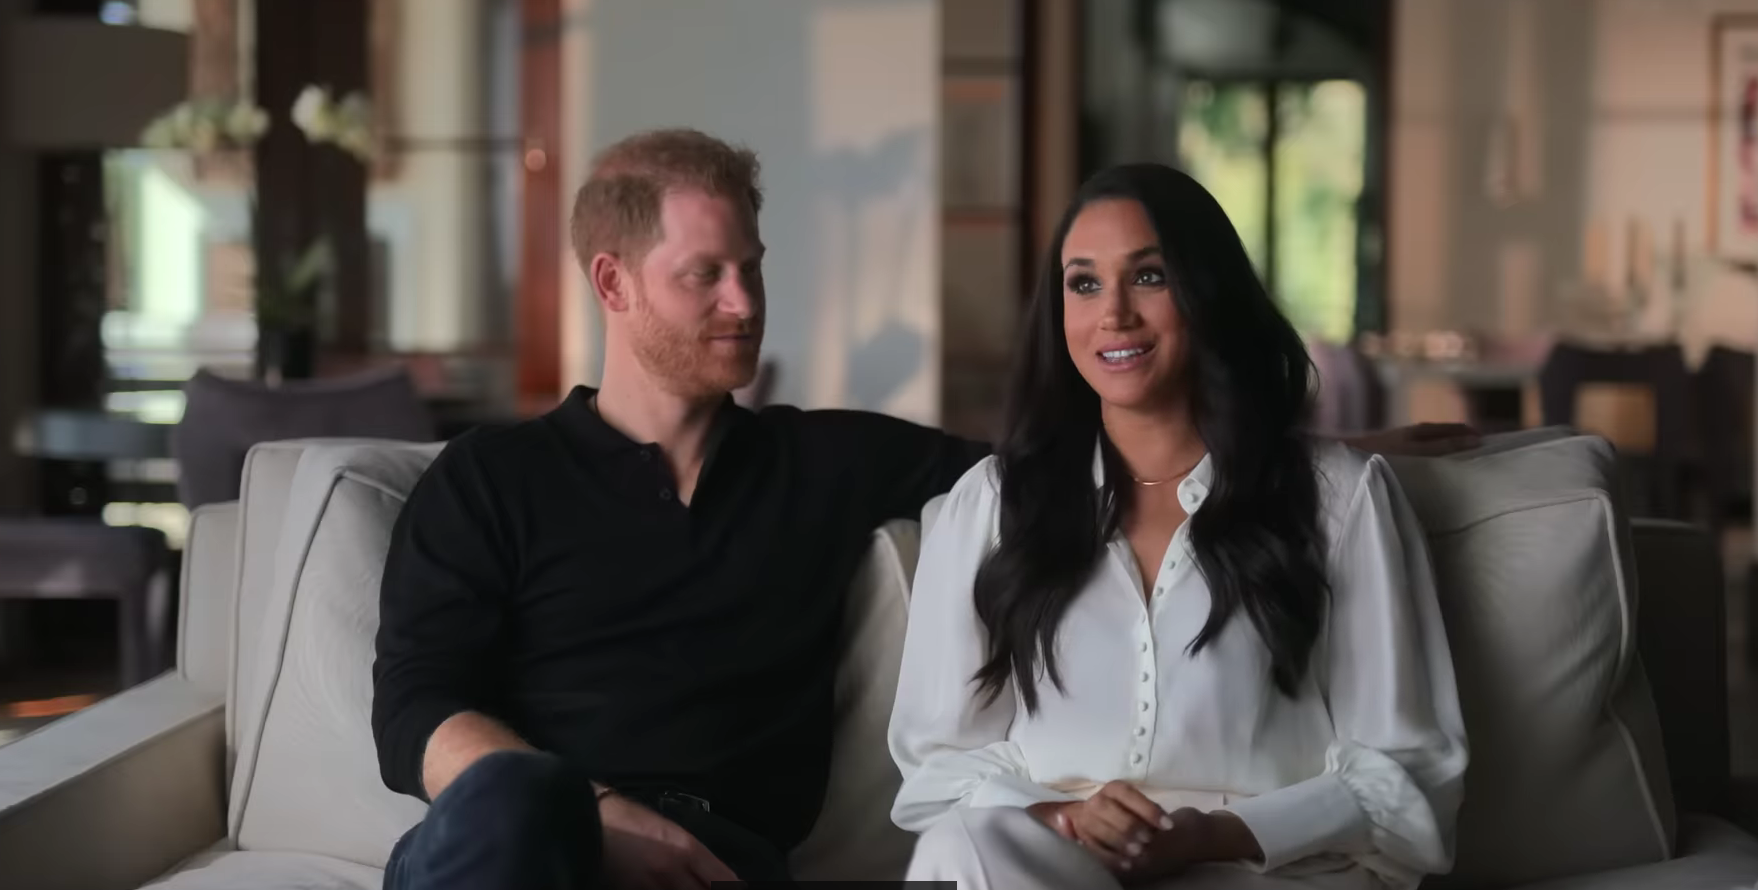 “We Know the Truth” – “Harry and Meghan” drop two volumes of truth bombs

+2023